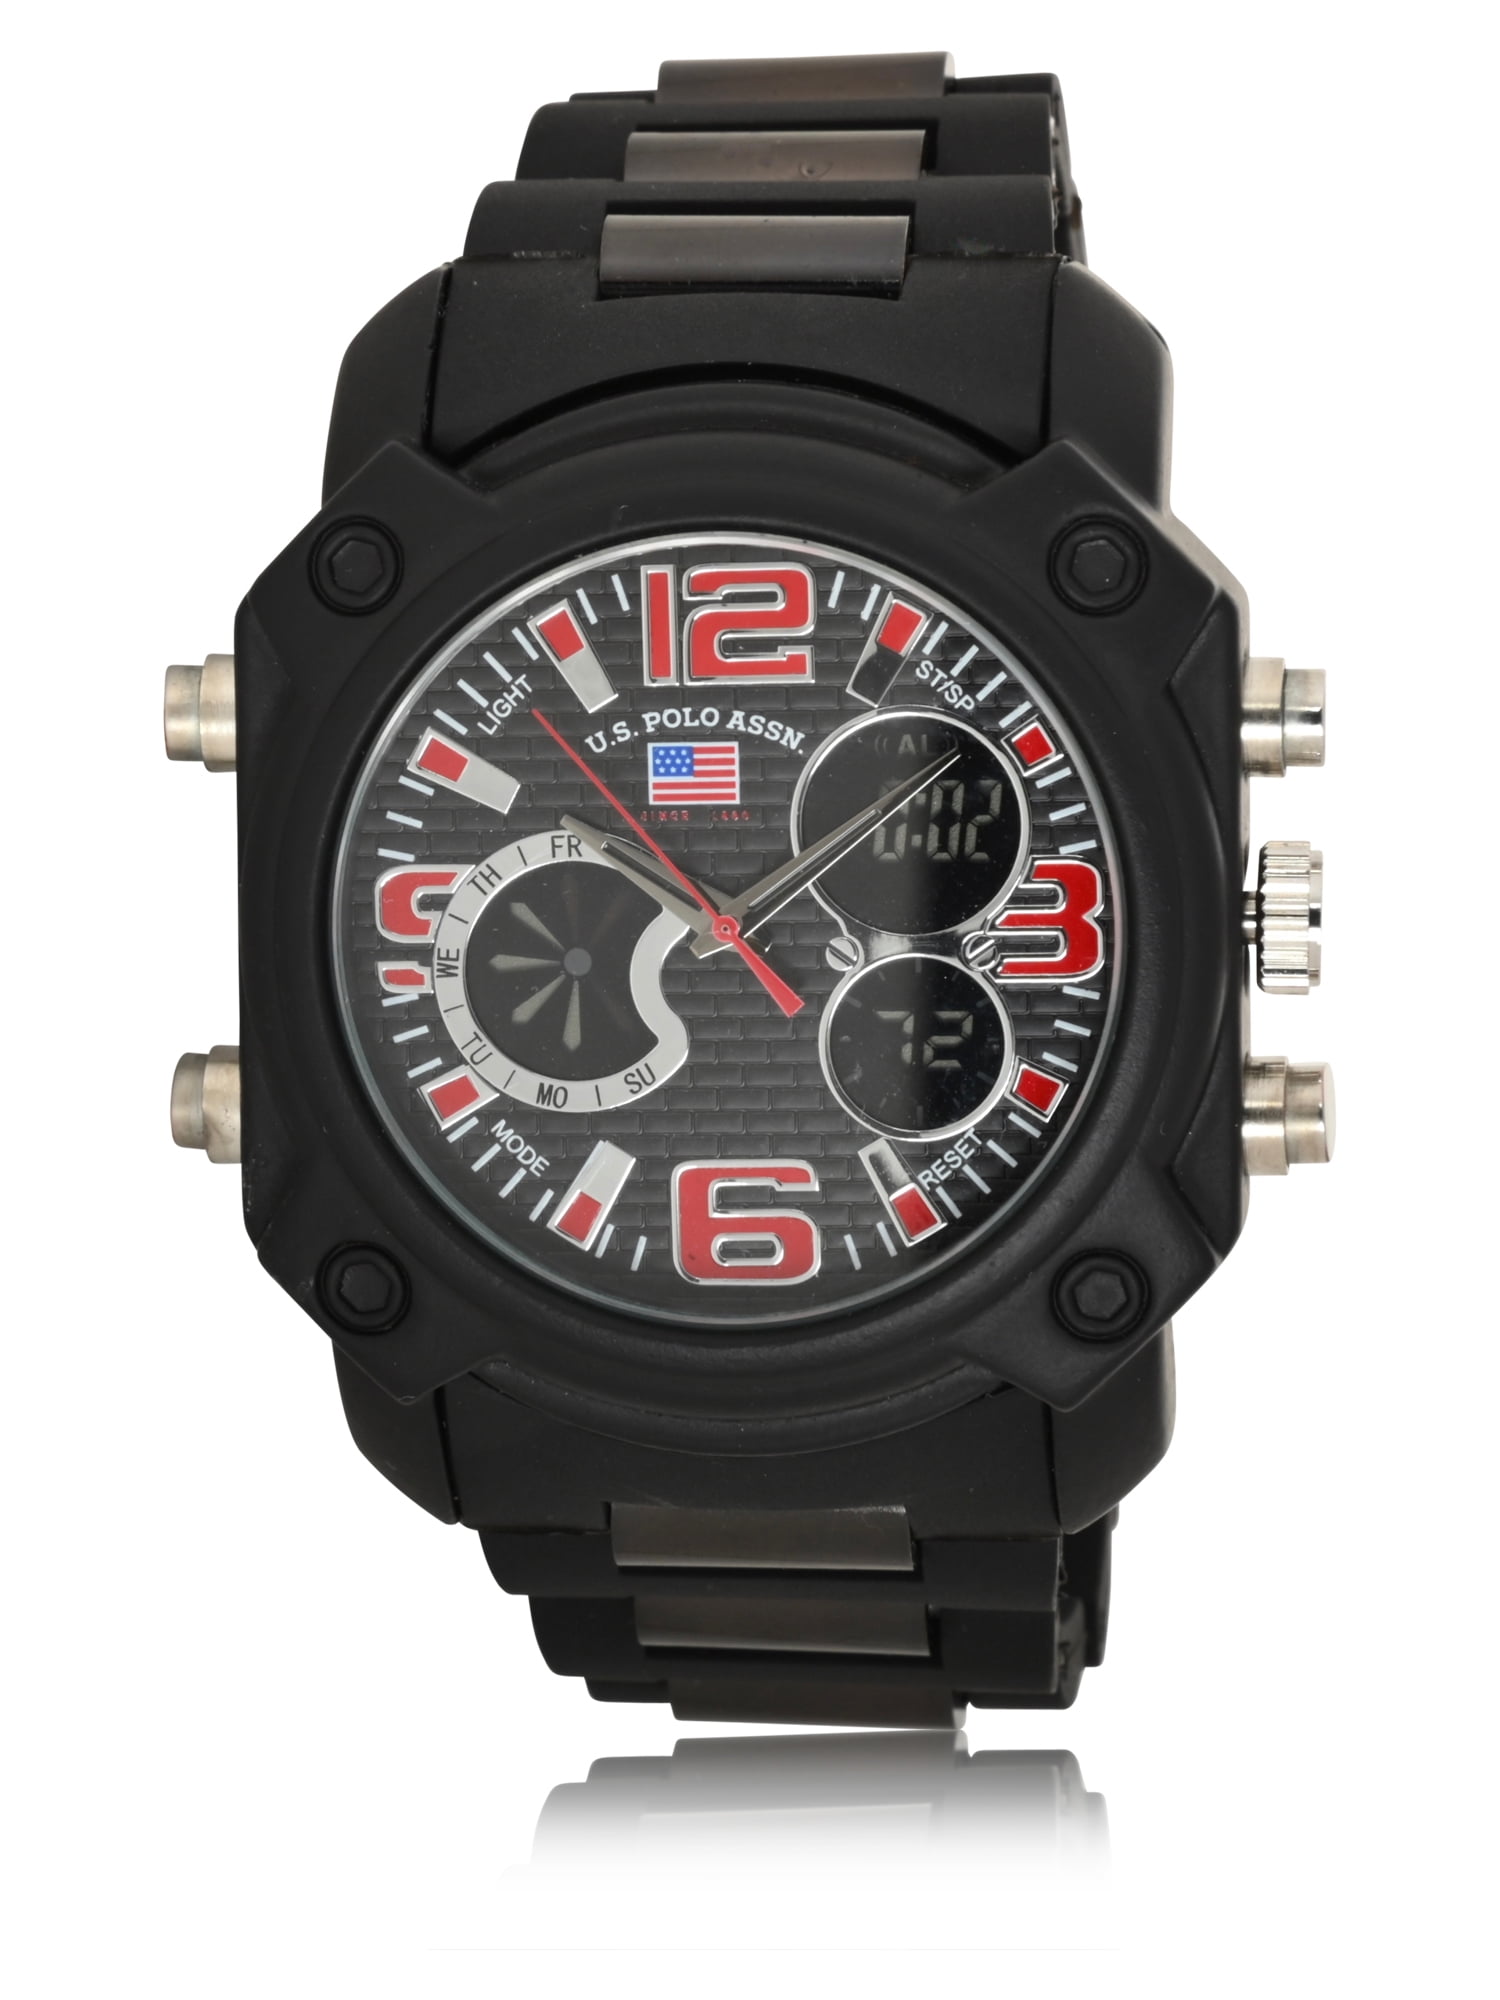 U.S. Polo Assn. Men's Watch in Black Case w/ Red and Blue Analog and ...